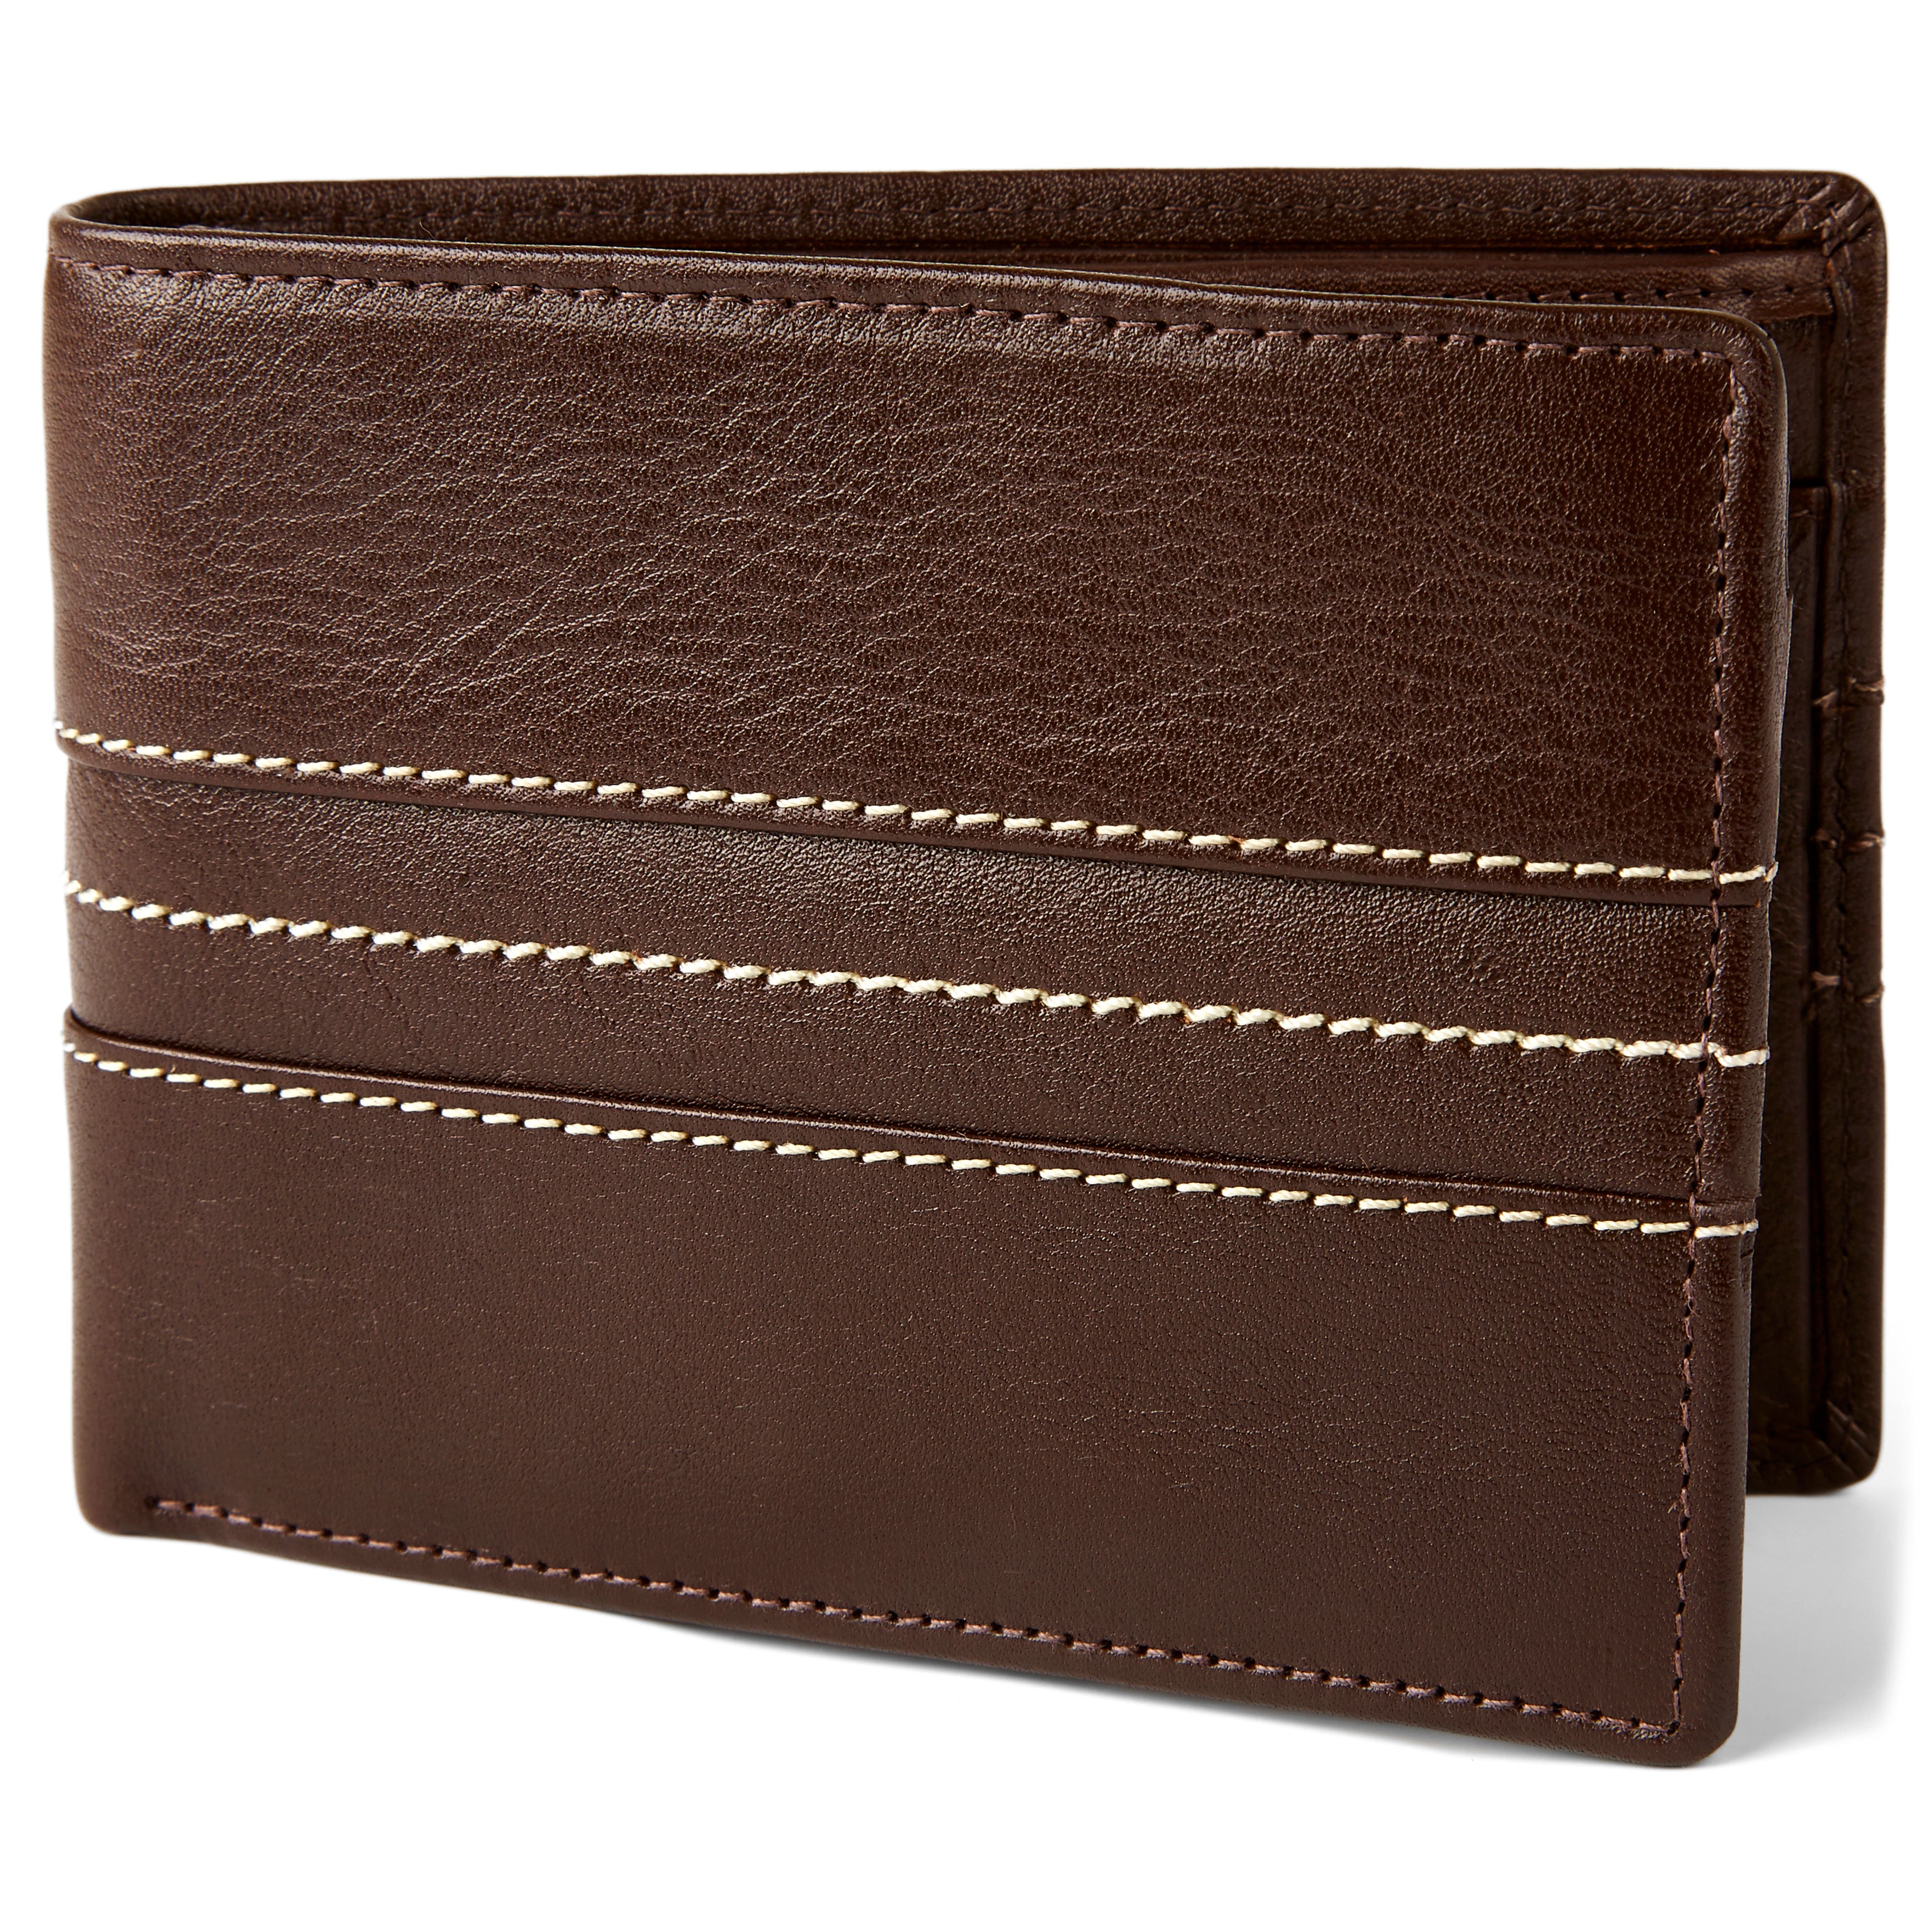 Royce Triple Stitched Brown Leather Wallet